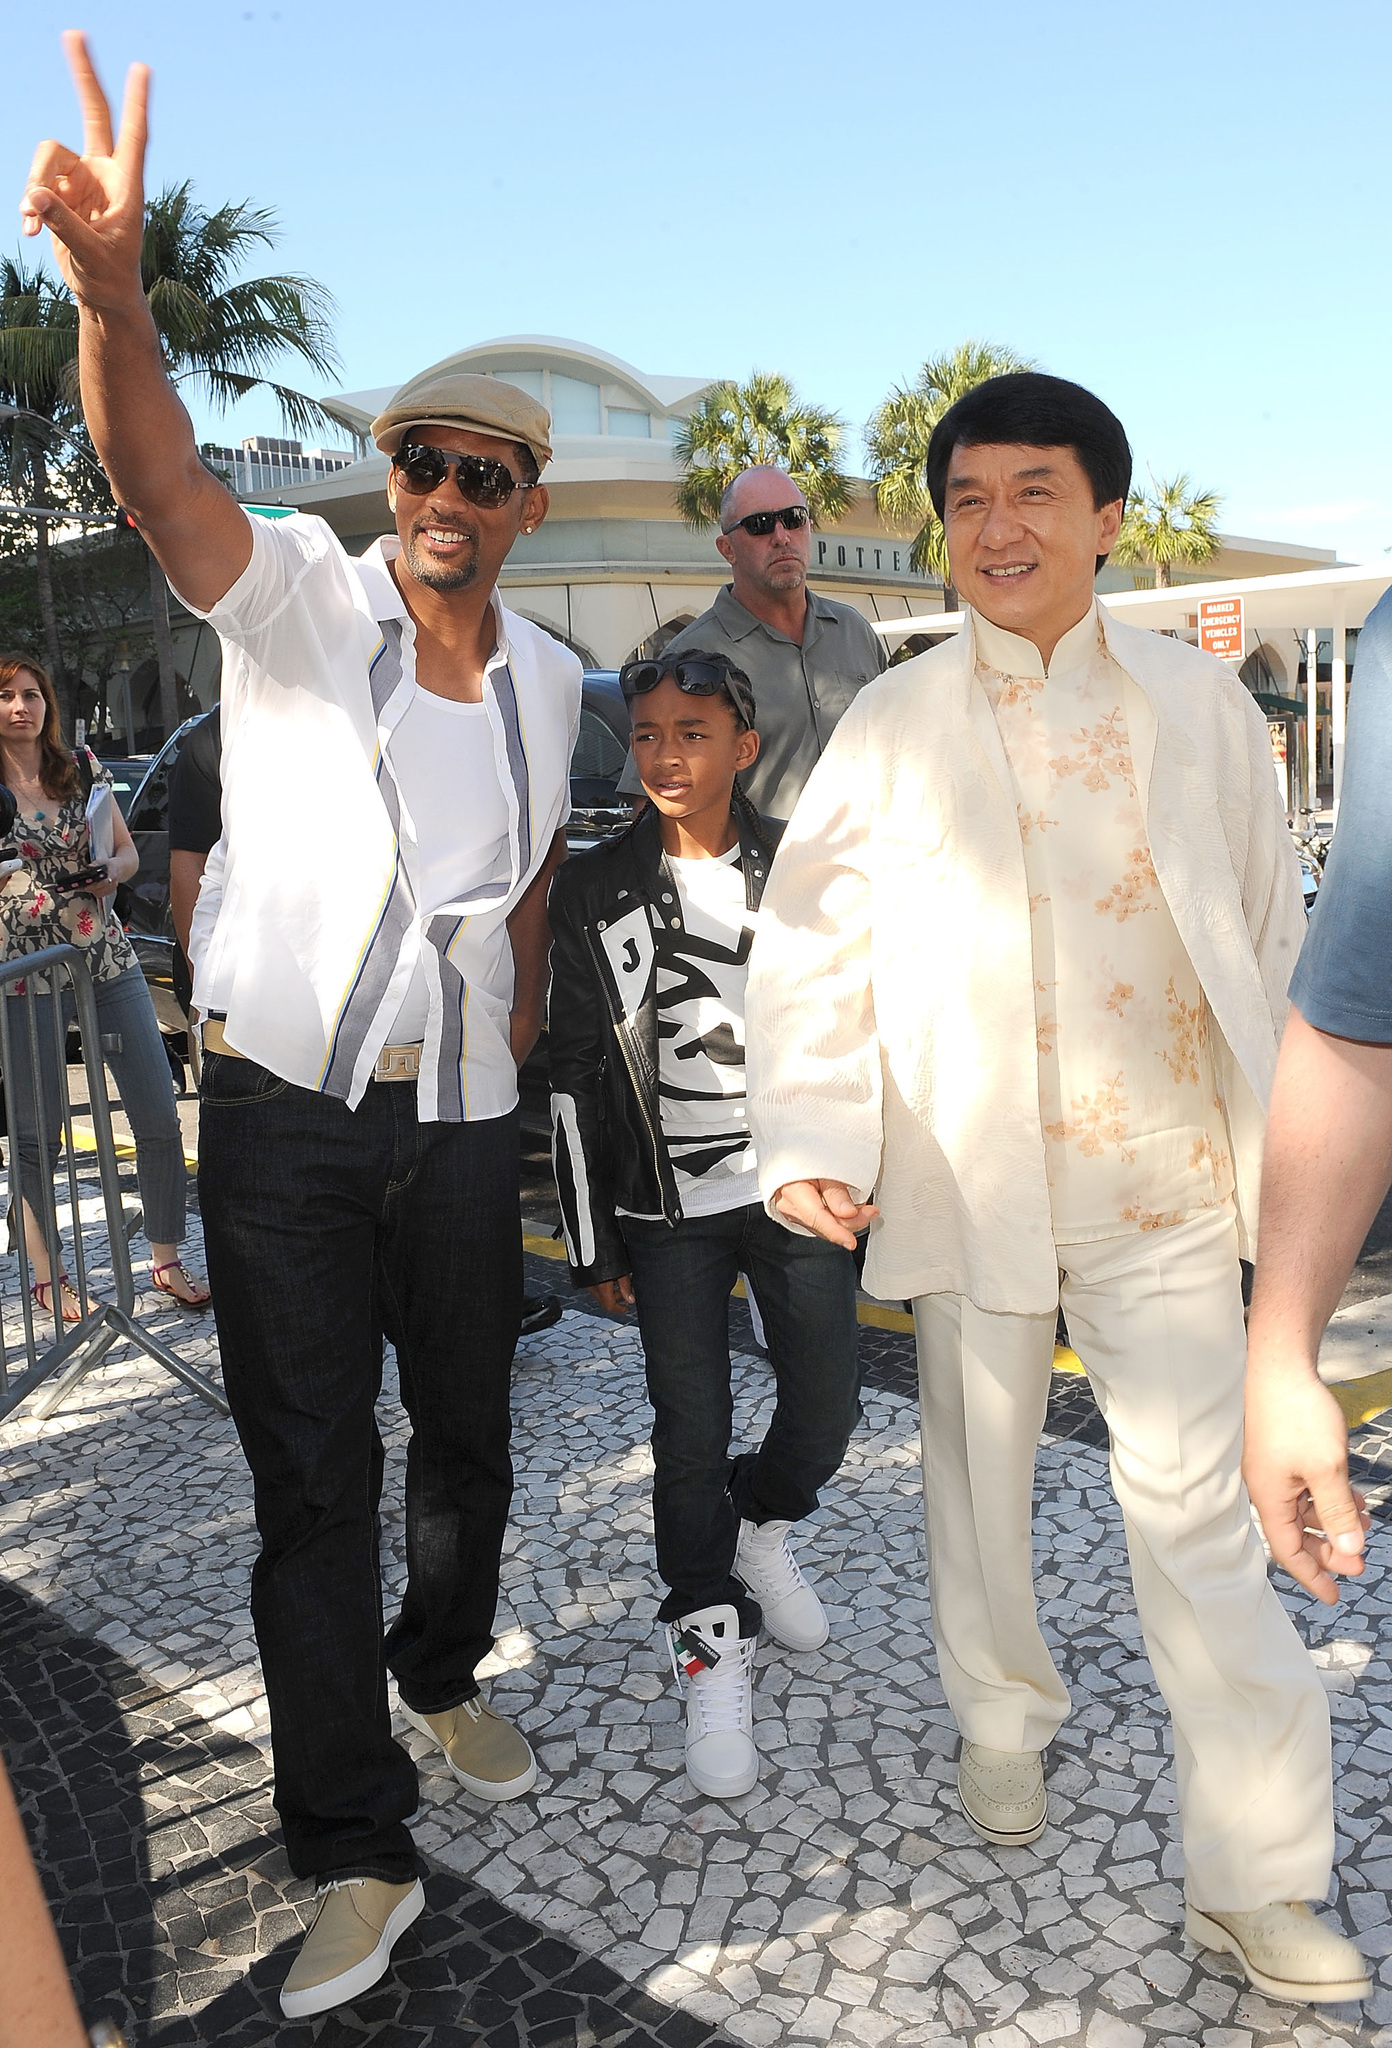 Will Smith, Jackie Chan and Jaden Smith at event of The Karate Kid (2010)